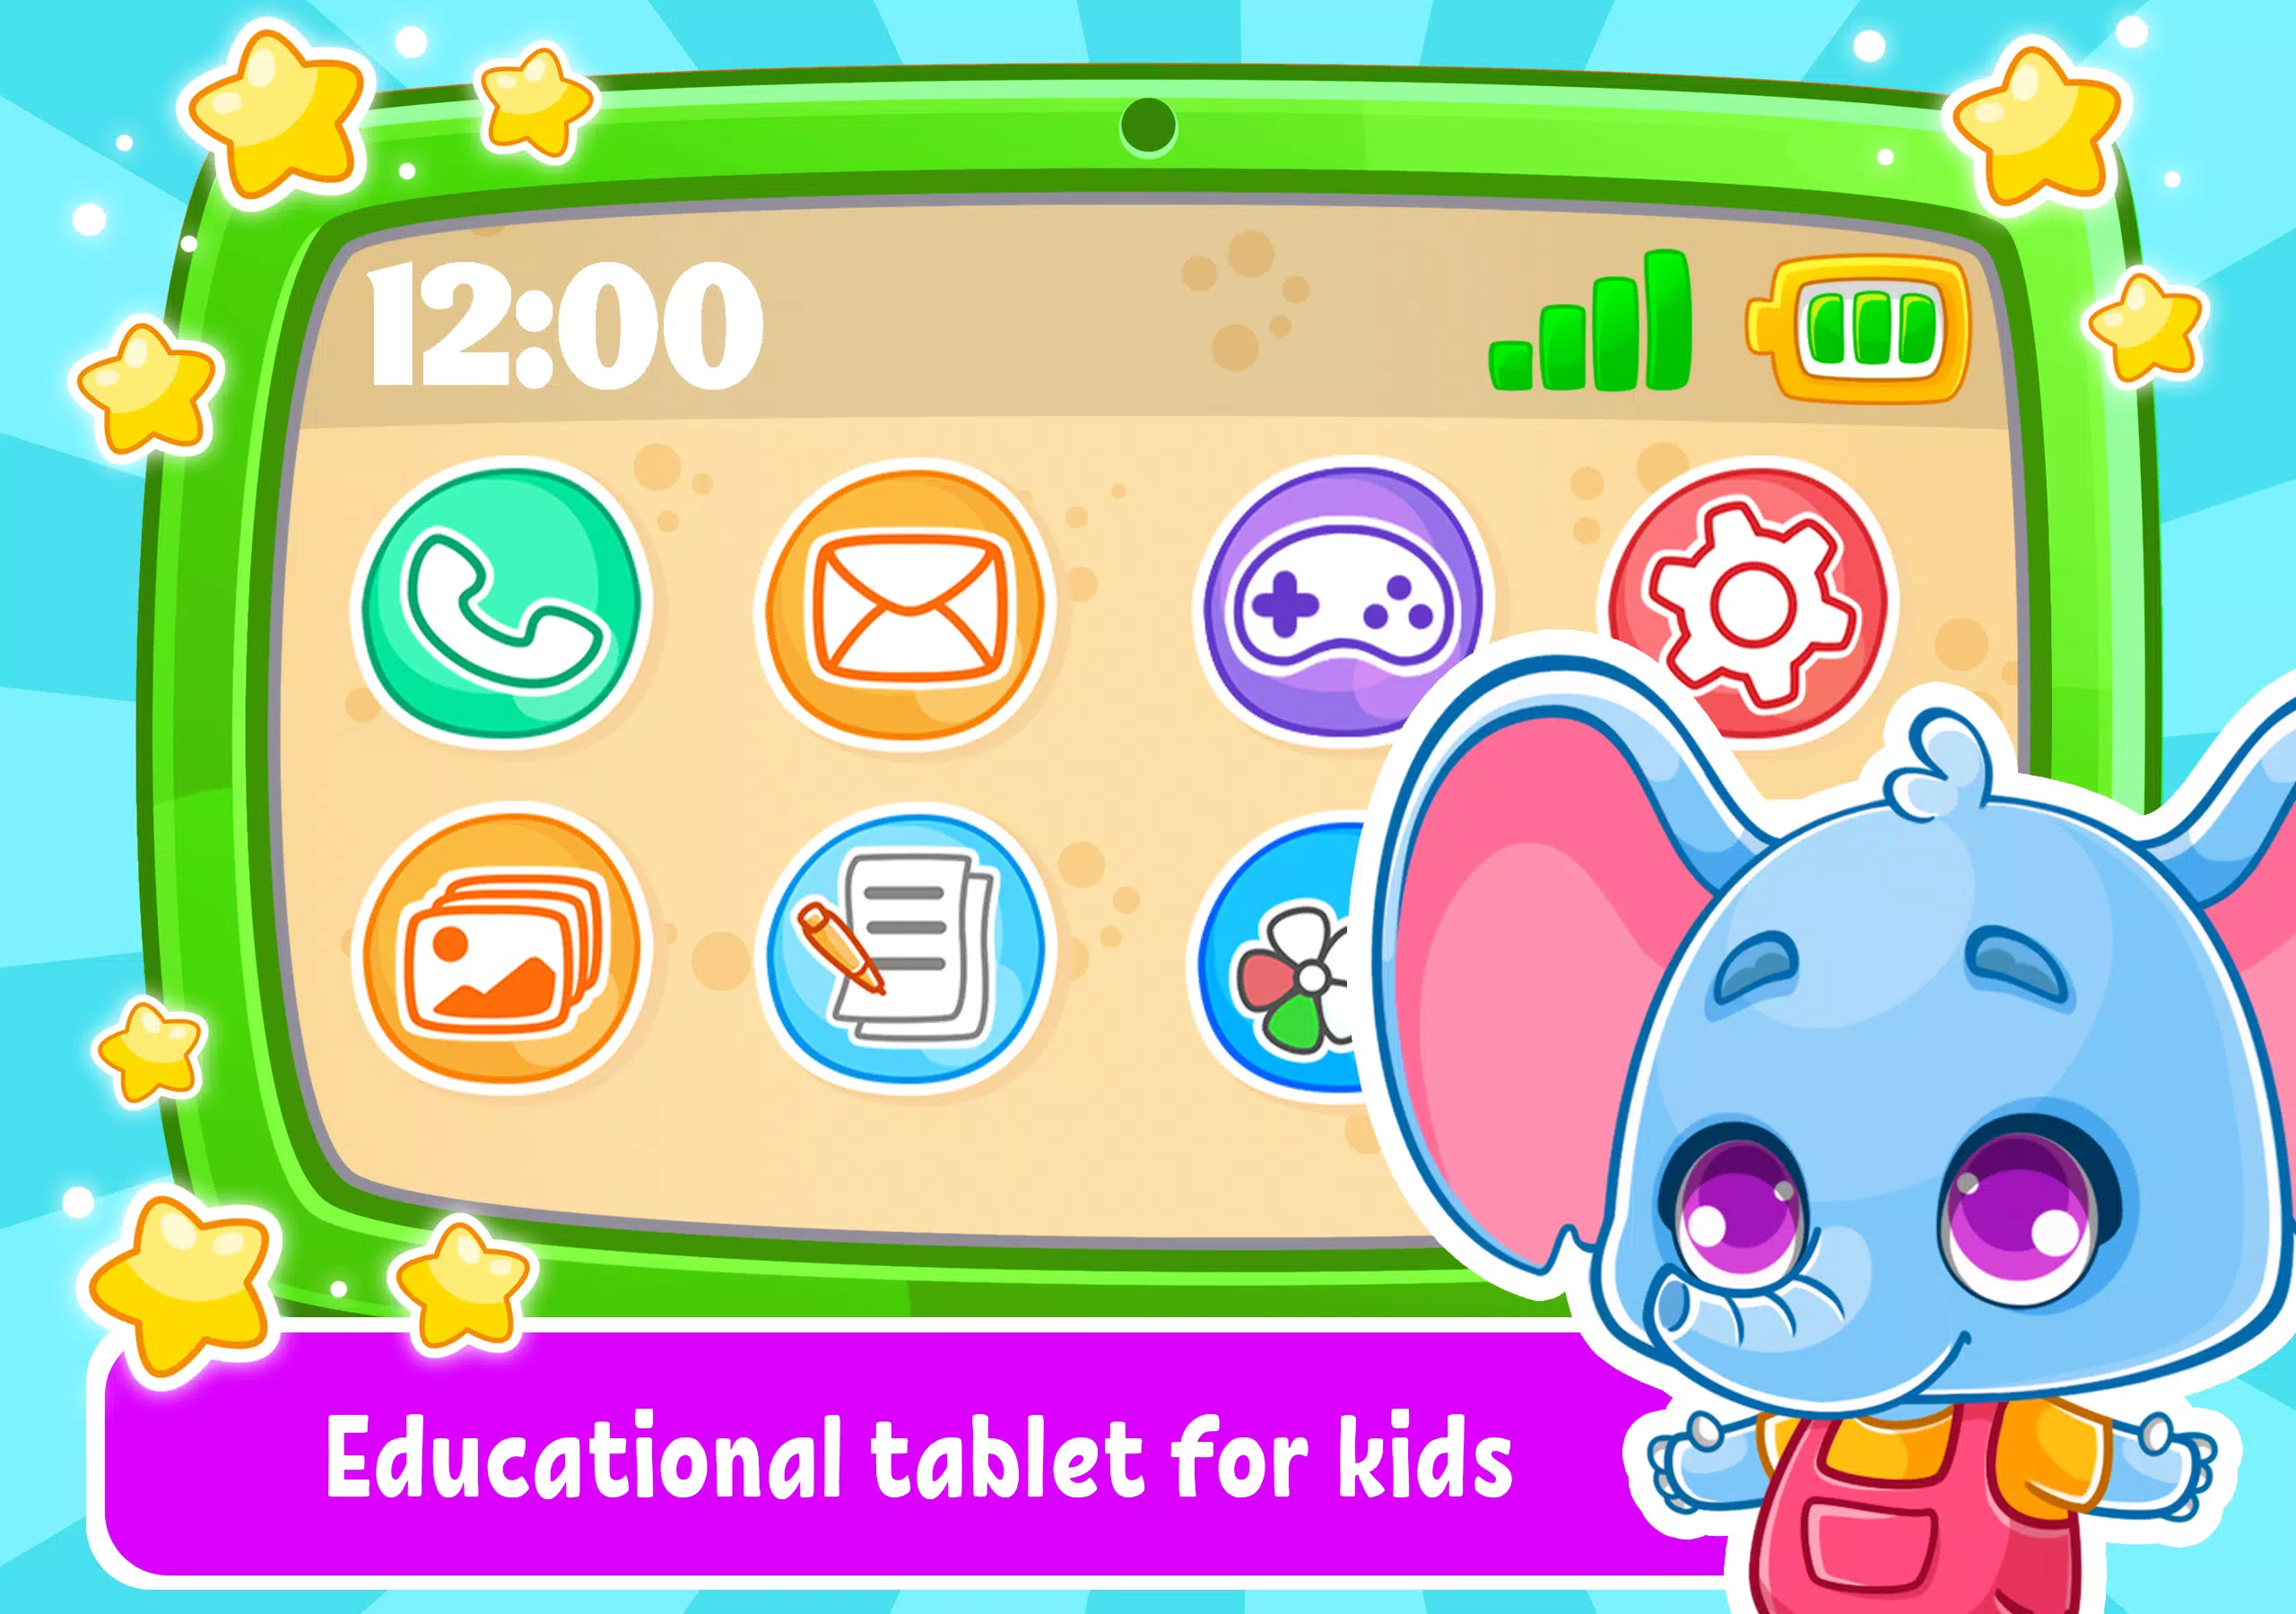 Babyphone & tablet: baby games for Android - APK Download